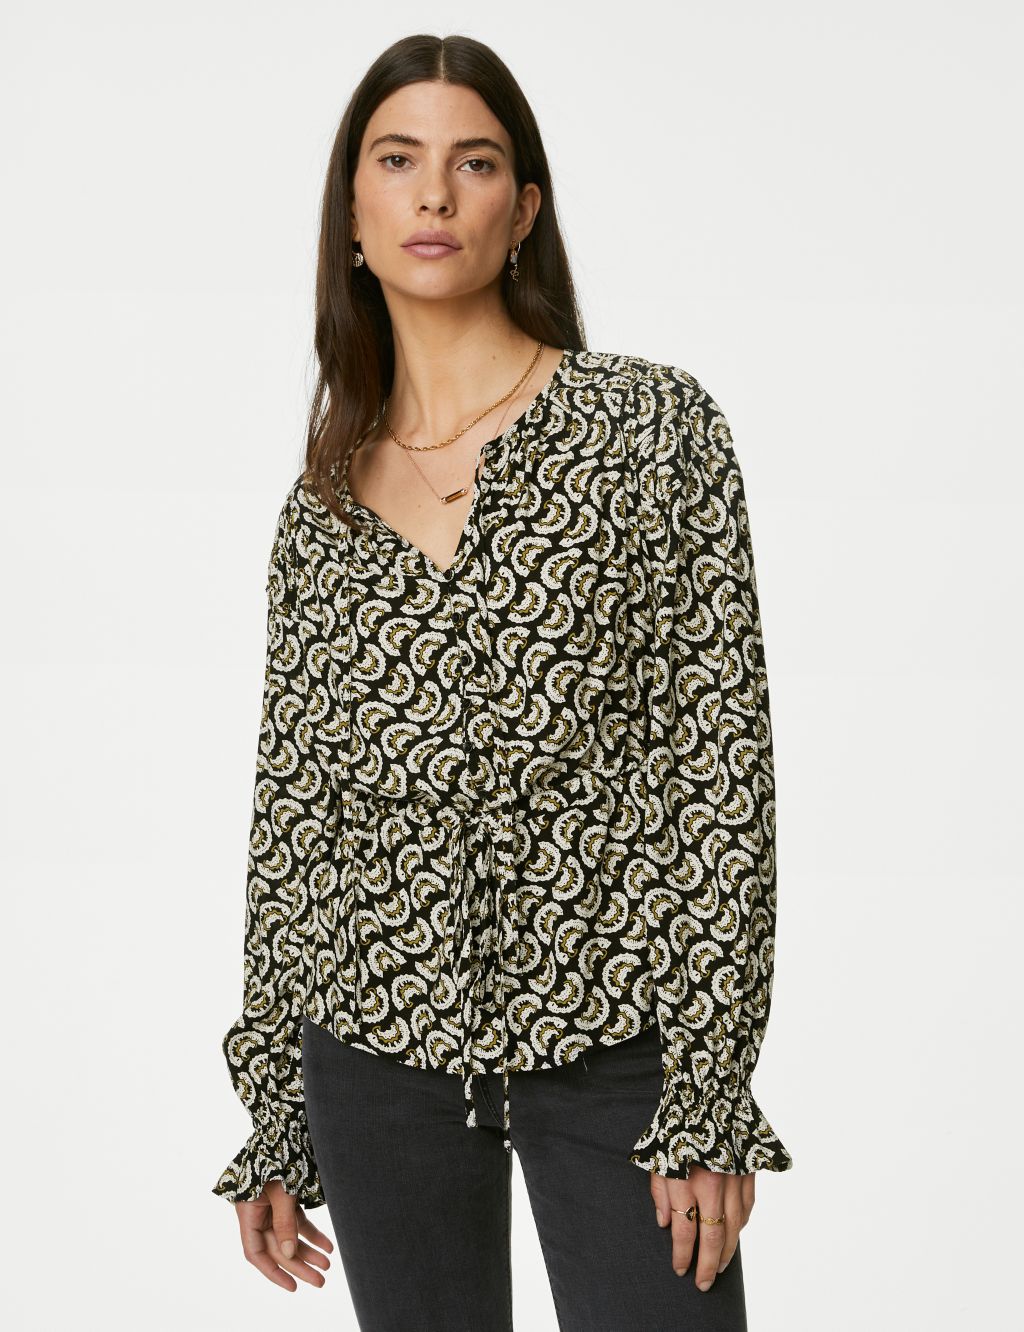 Printed Shirred Tie Neck Blouse image 1